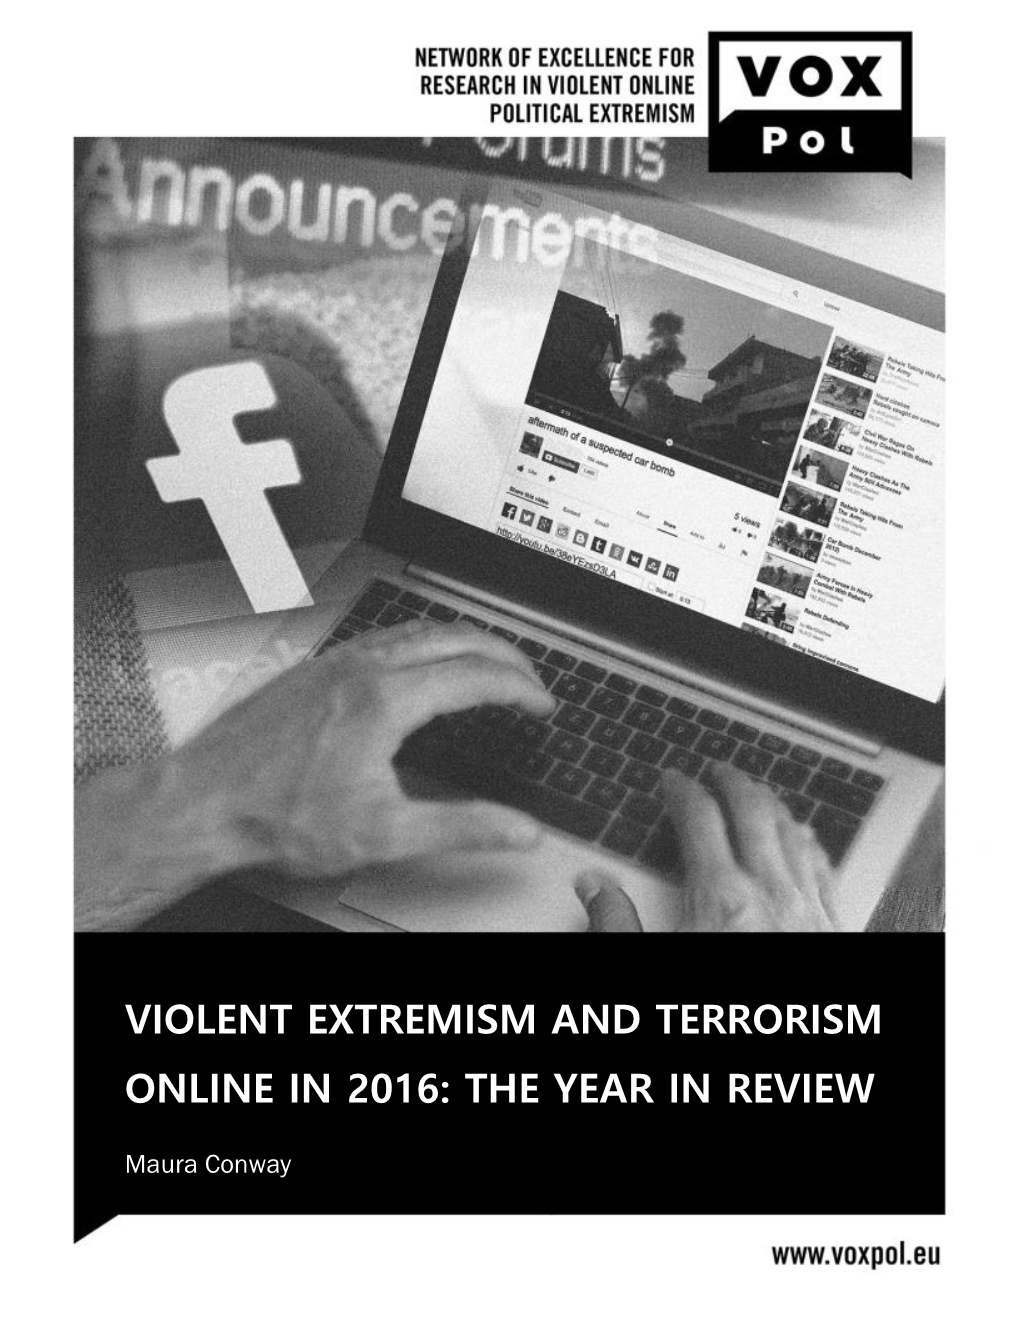 Violent Extremism and Terrorism Online in 2016: the Year in Review